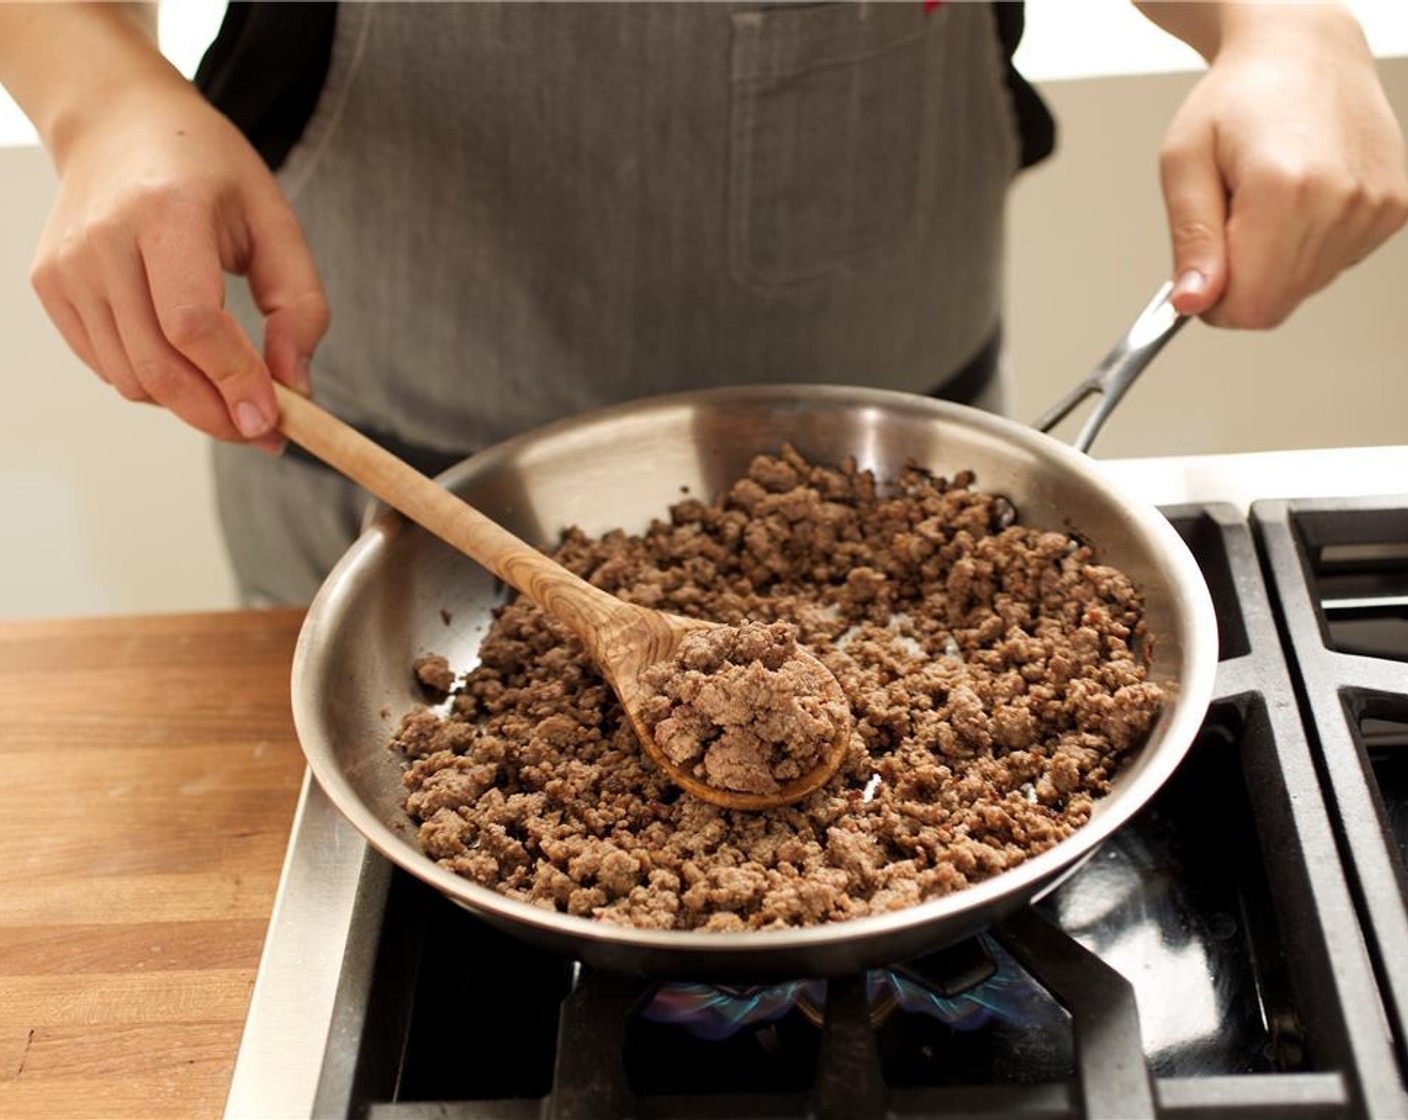 step 7 Add 85/15 Lean Ground Beef (8 oz), Salt (1/4 tsp), and Ground Black Pepper (1/4 tsp). Cook until browned, breaking up the beef into medium-sized pieces while cooking, about 6 minutes.